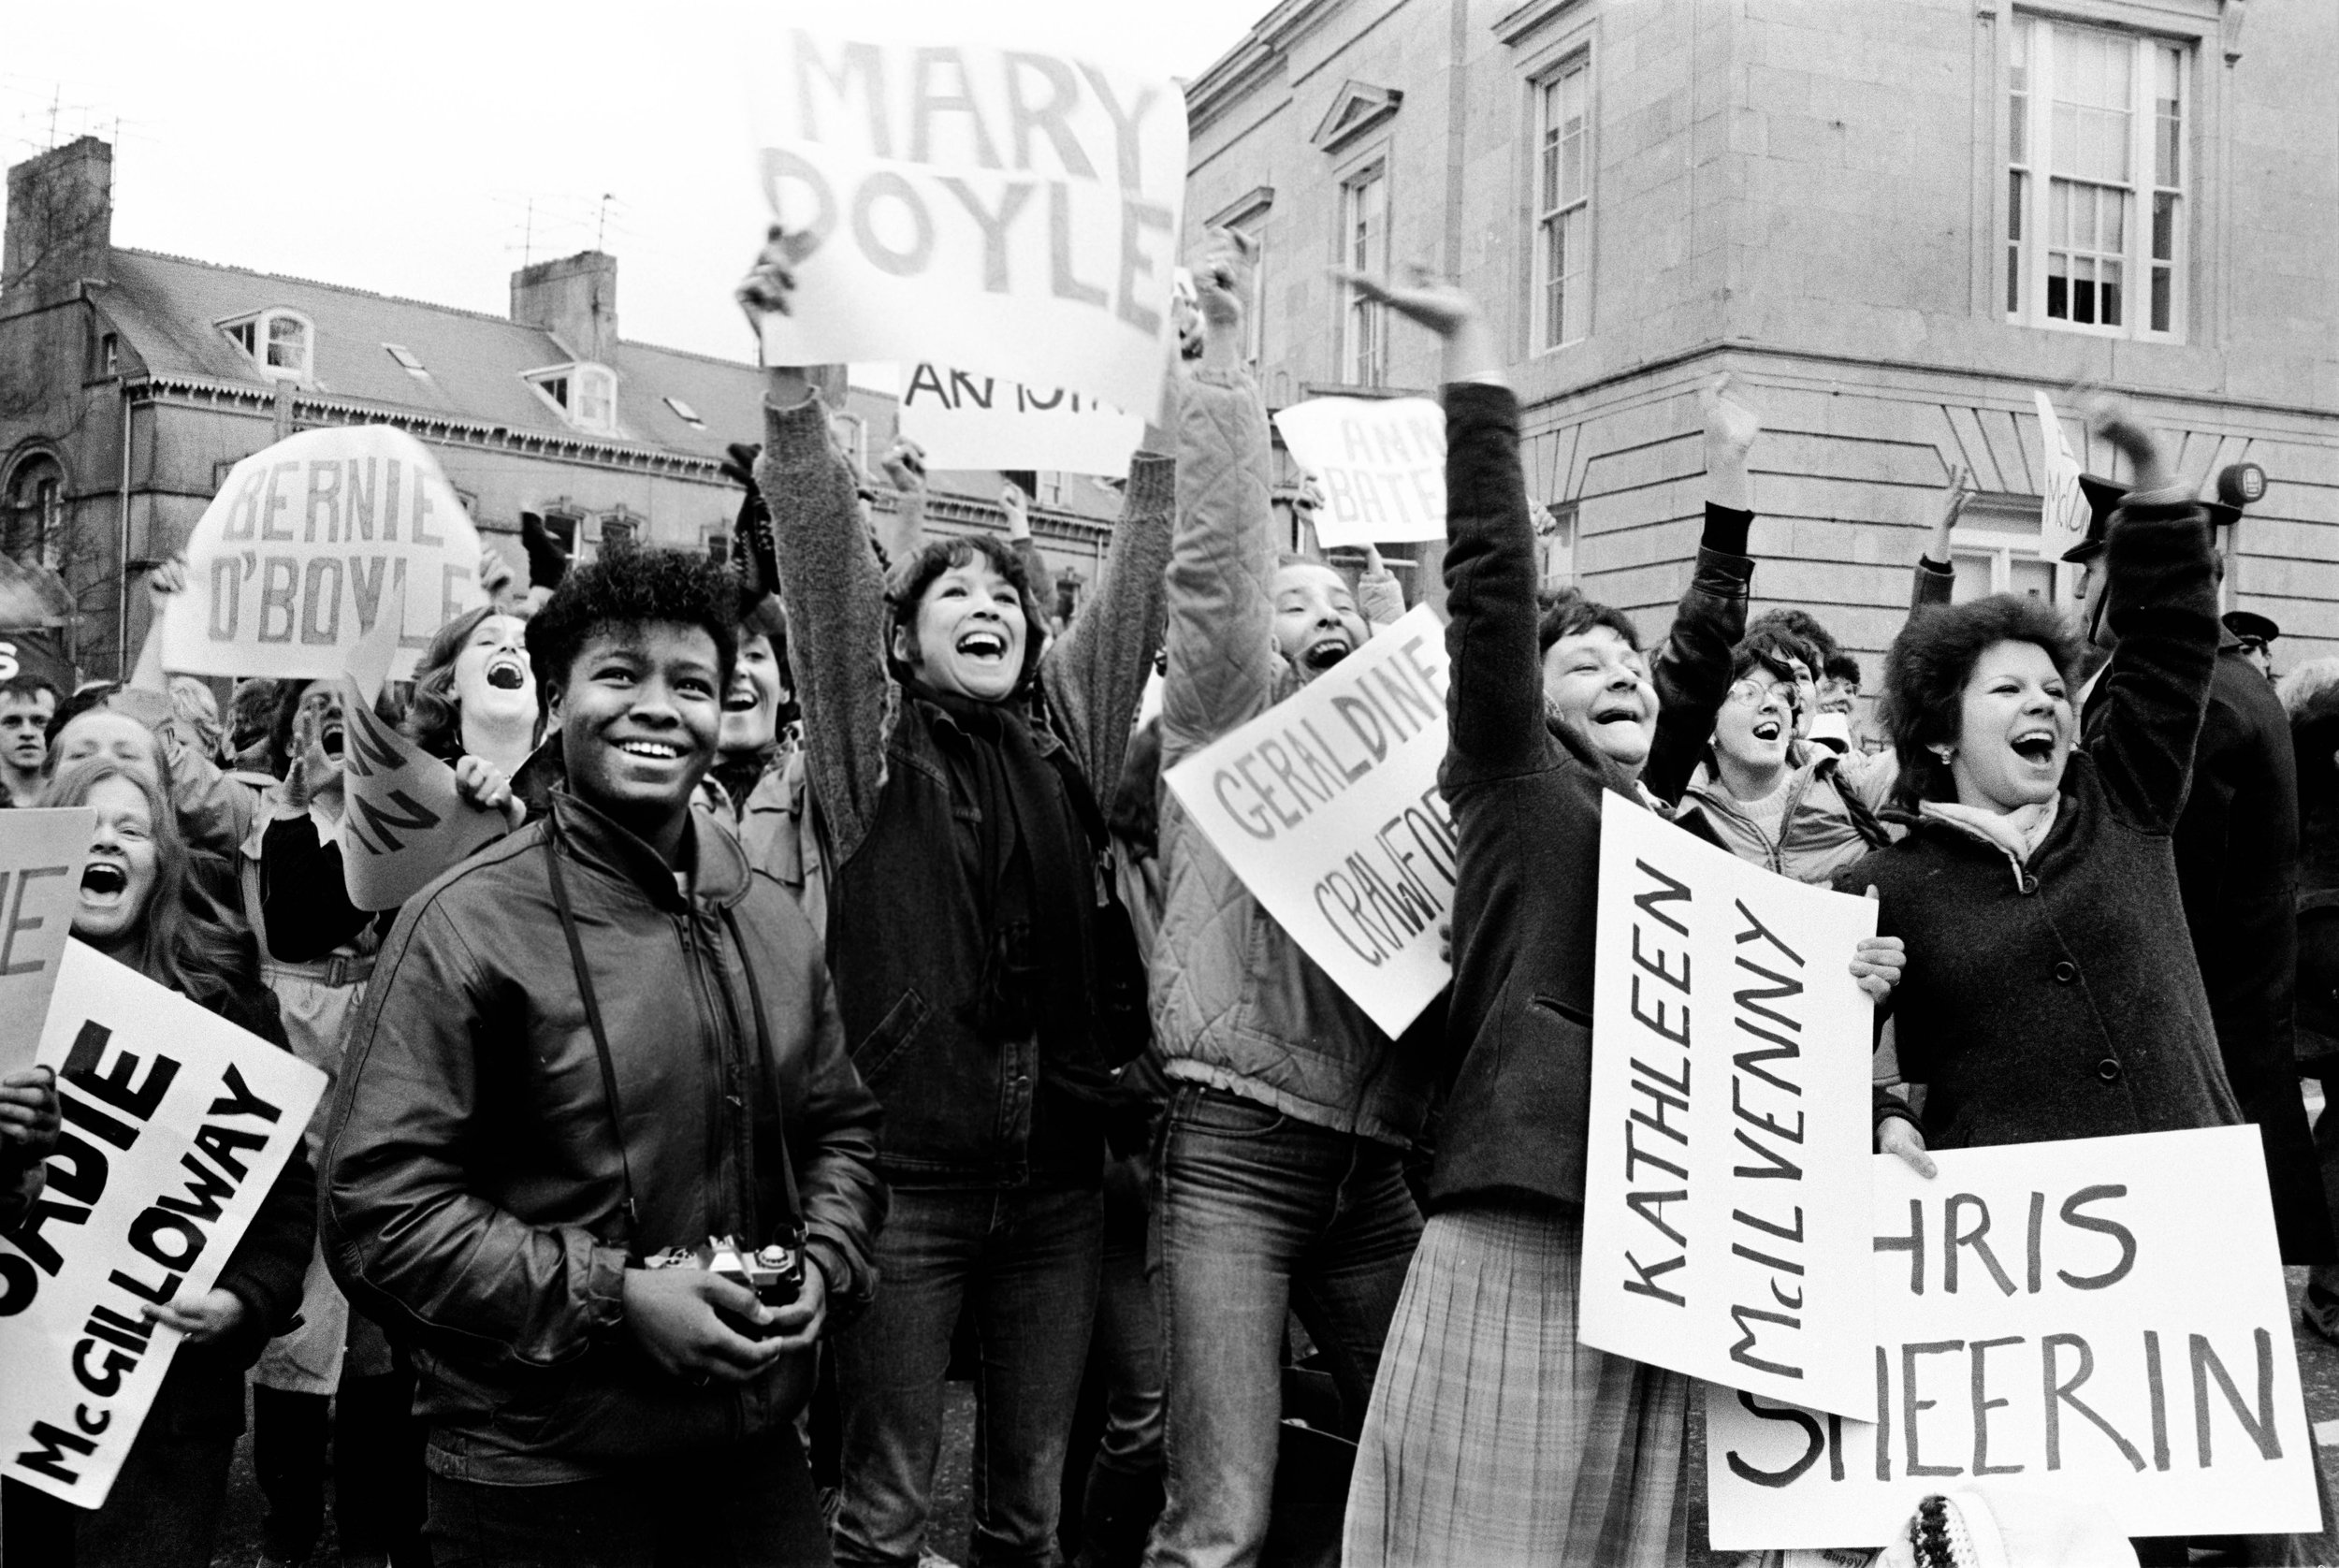 Previous edition: In Our Own Image: Chapter 2 - PROTEST! Photography, Activism and Social Change In Ireland